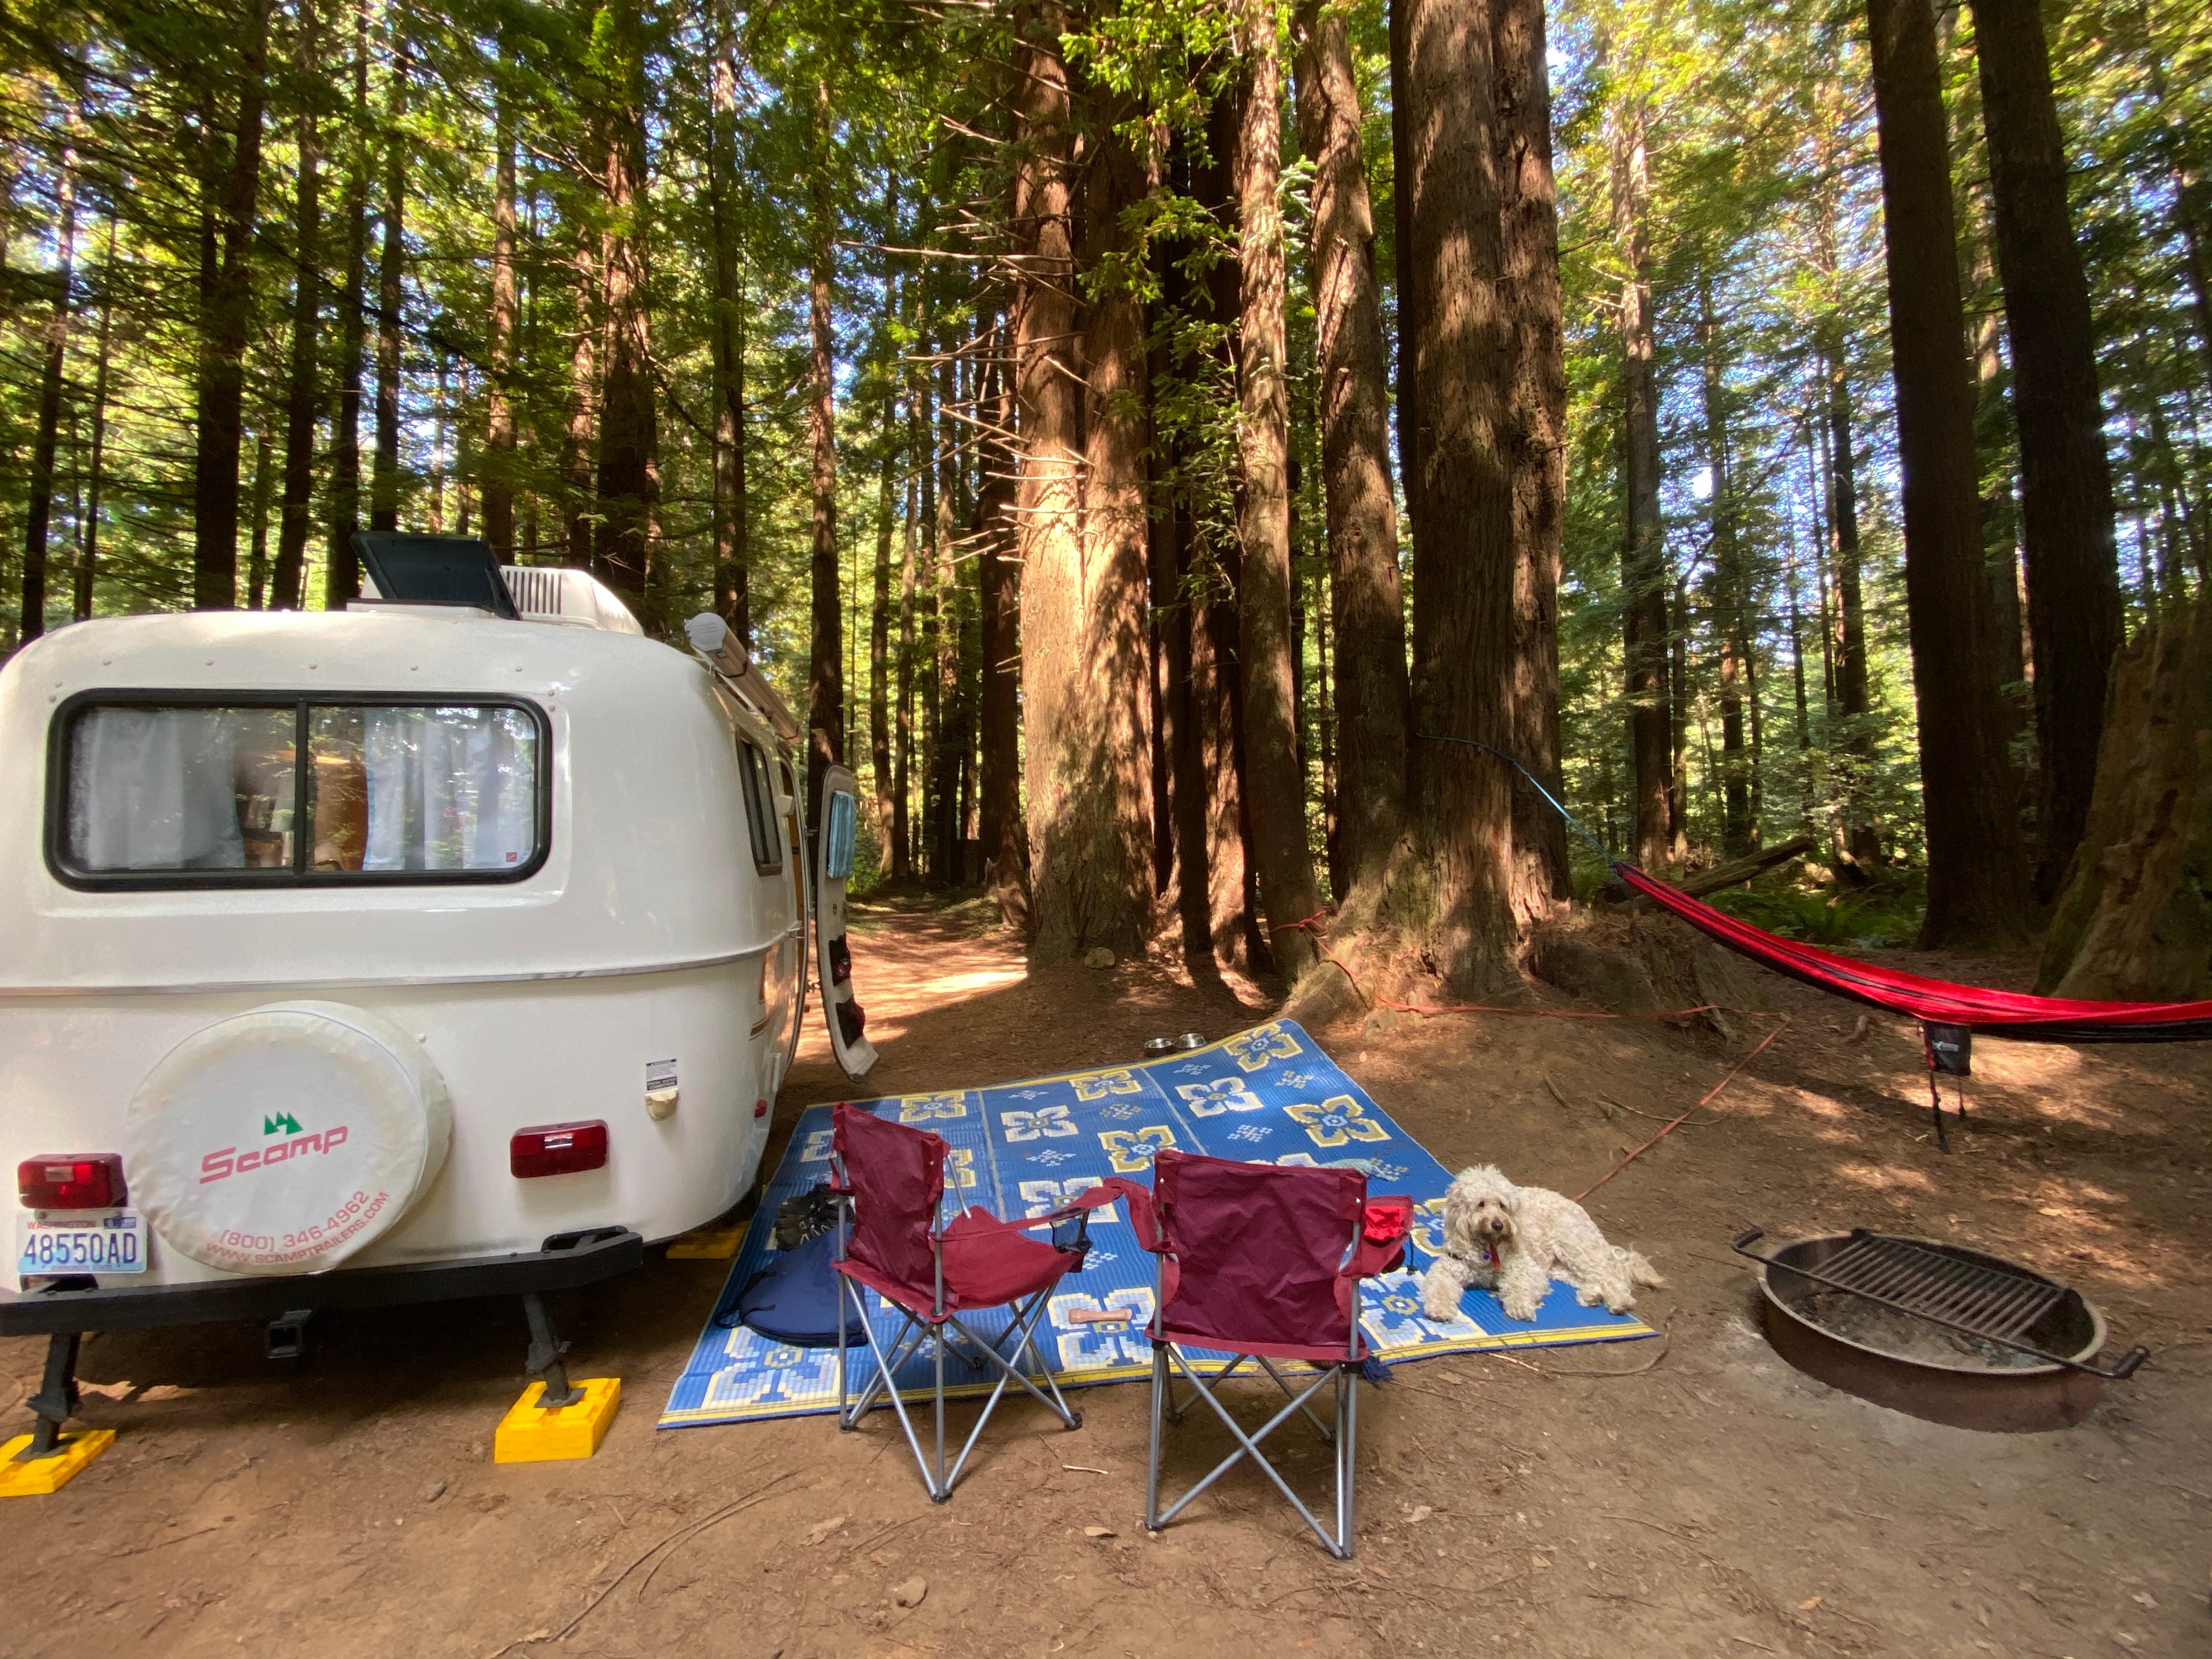 Camper submitted image from Crescent City/Redwoods KOA - 5